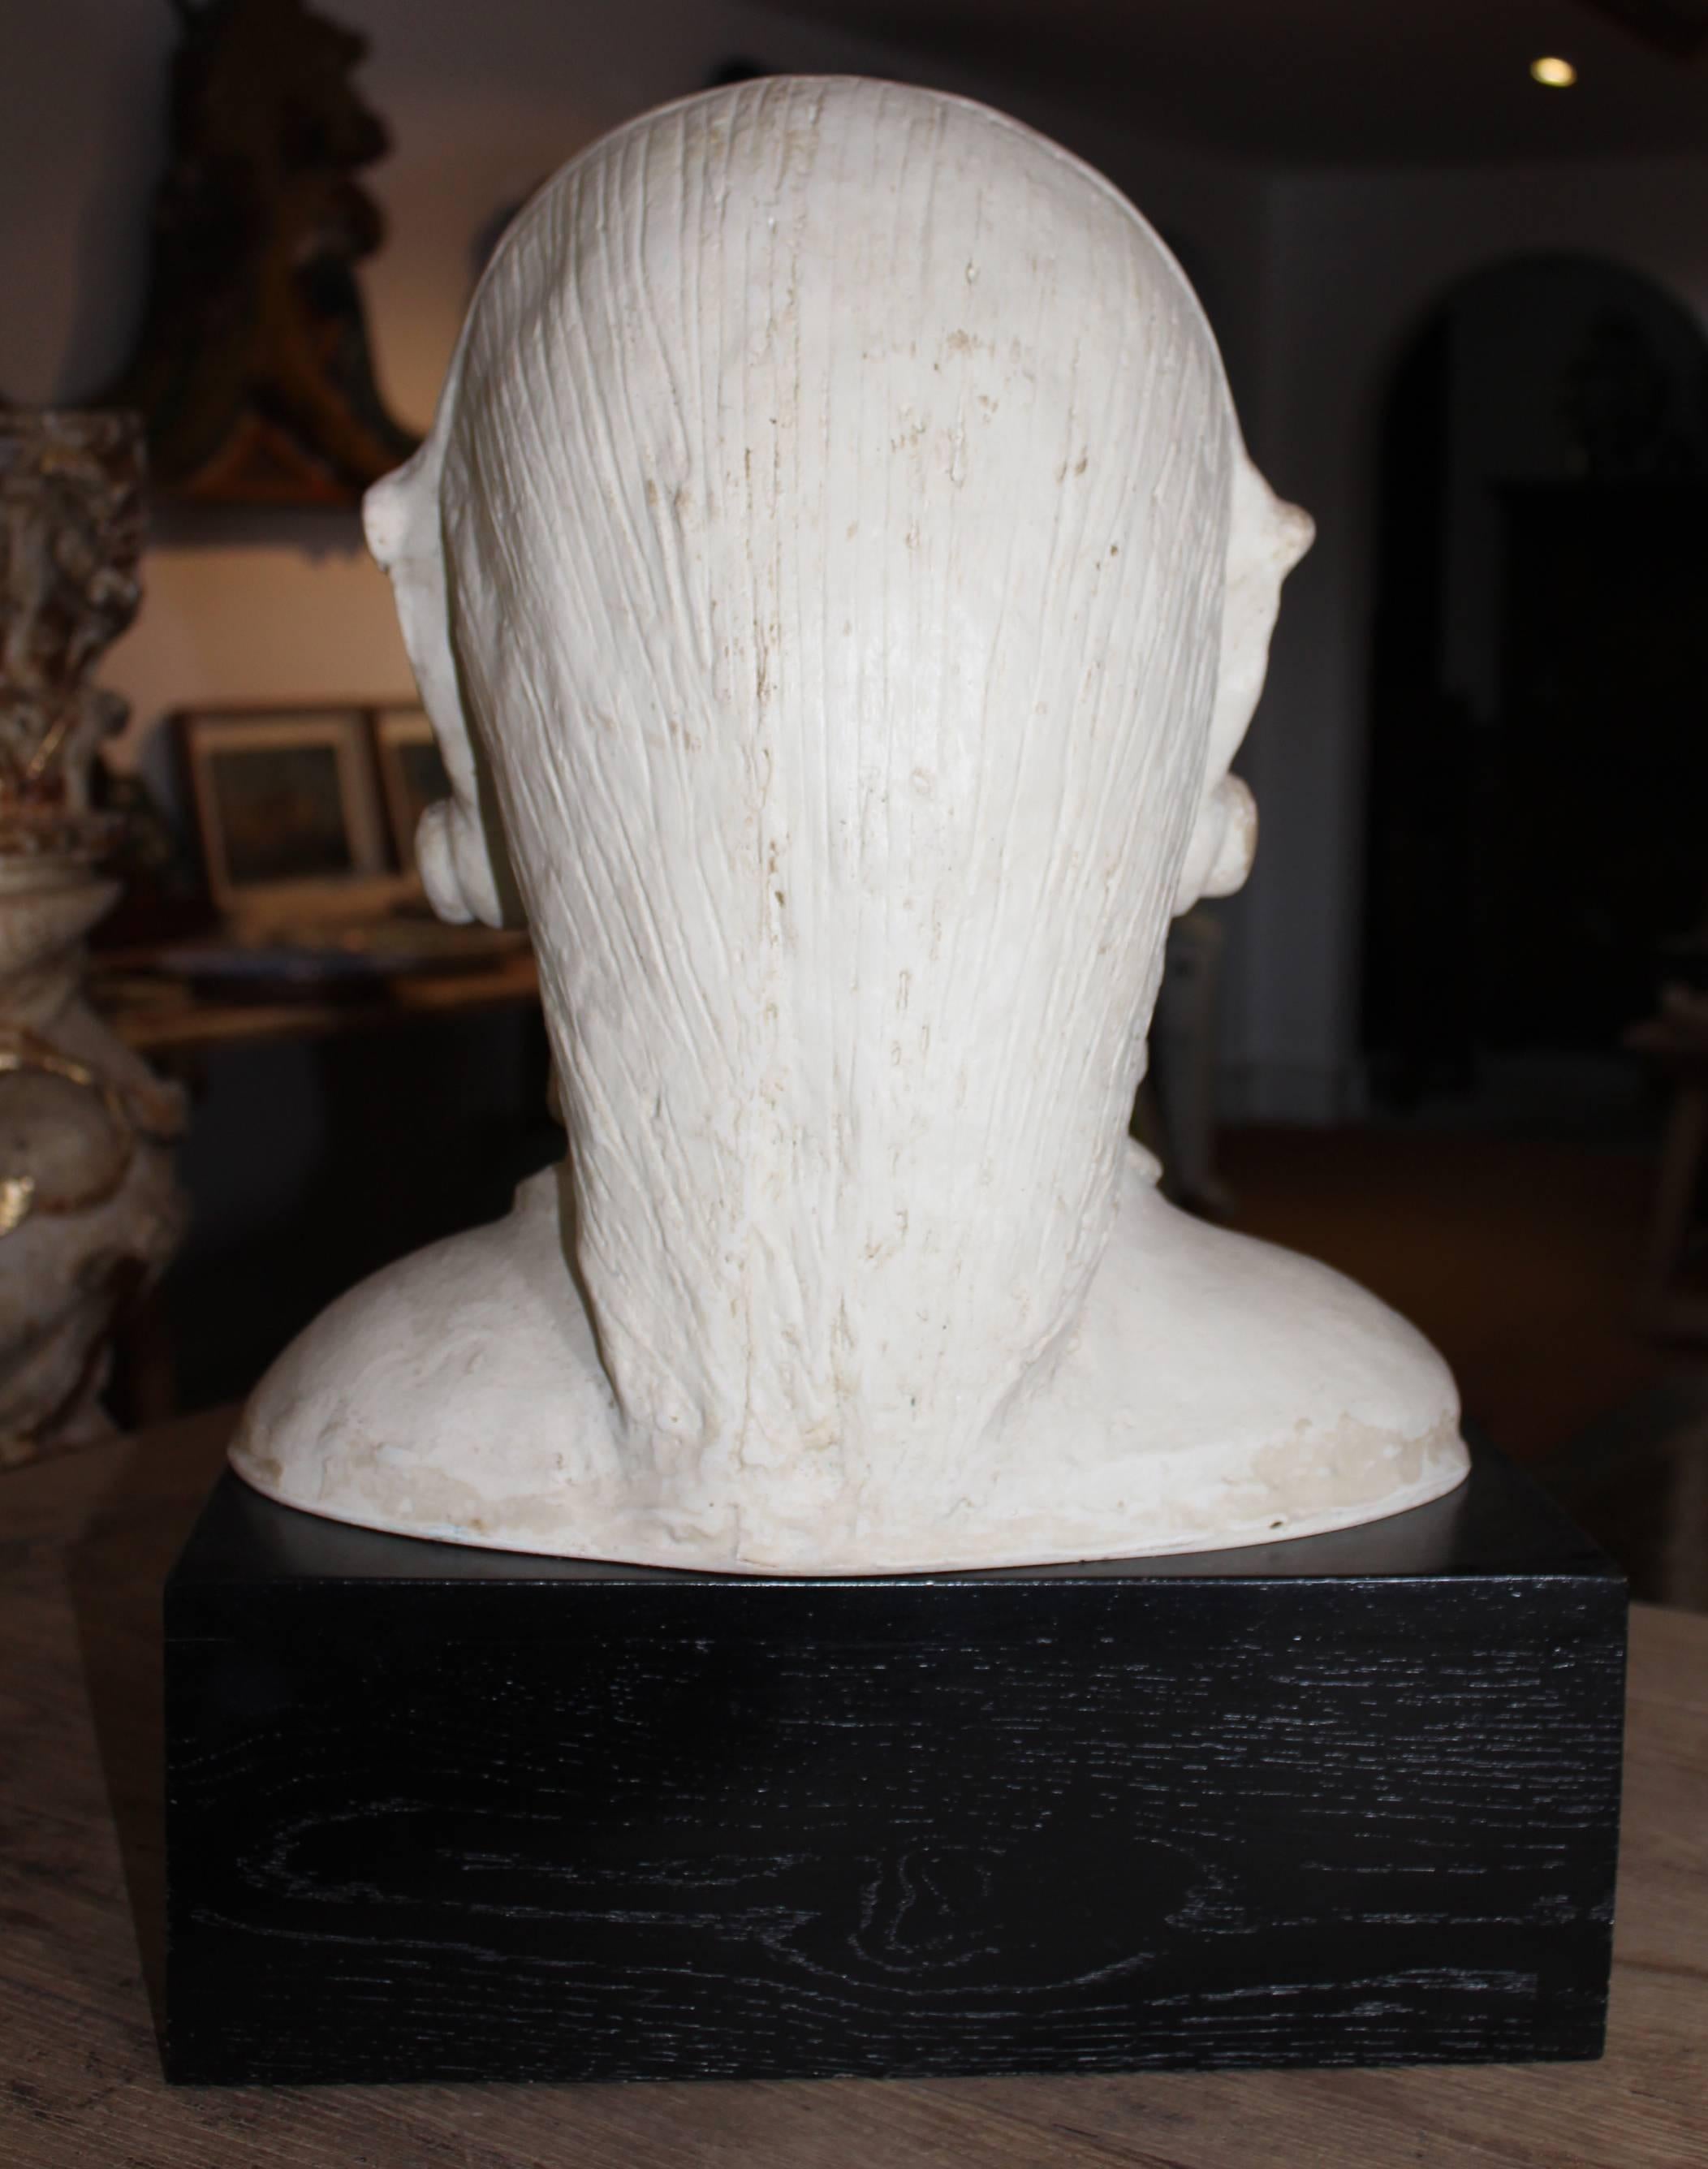 French Pair of Resin African Busts with Plaster Finish on a Black Wooden Pedestal